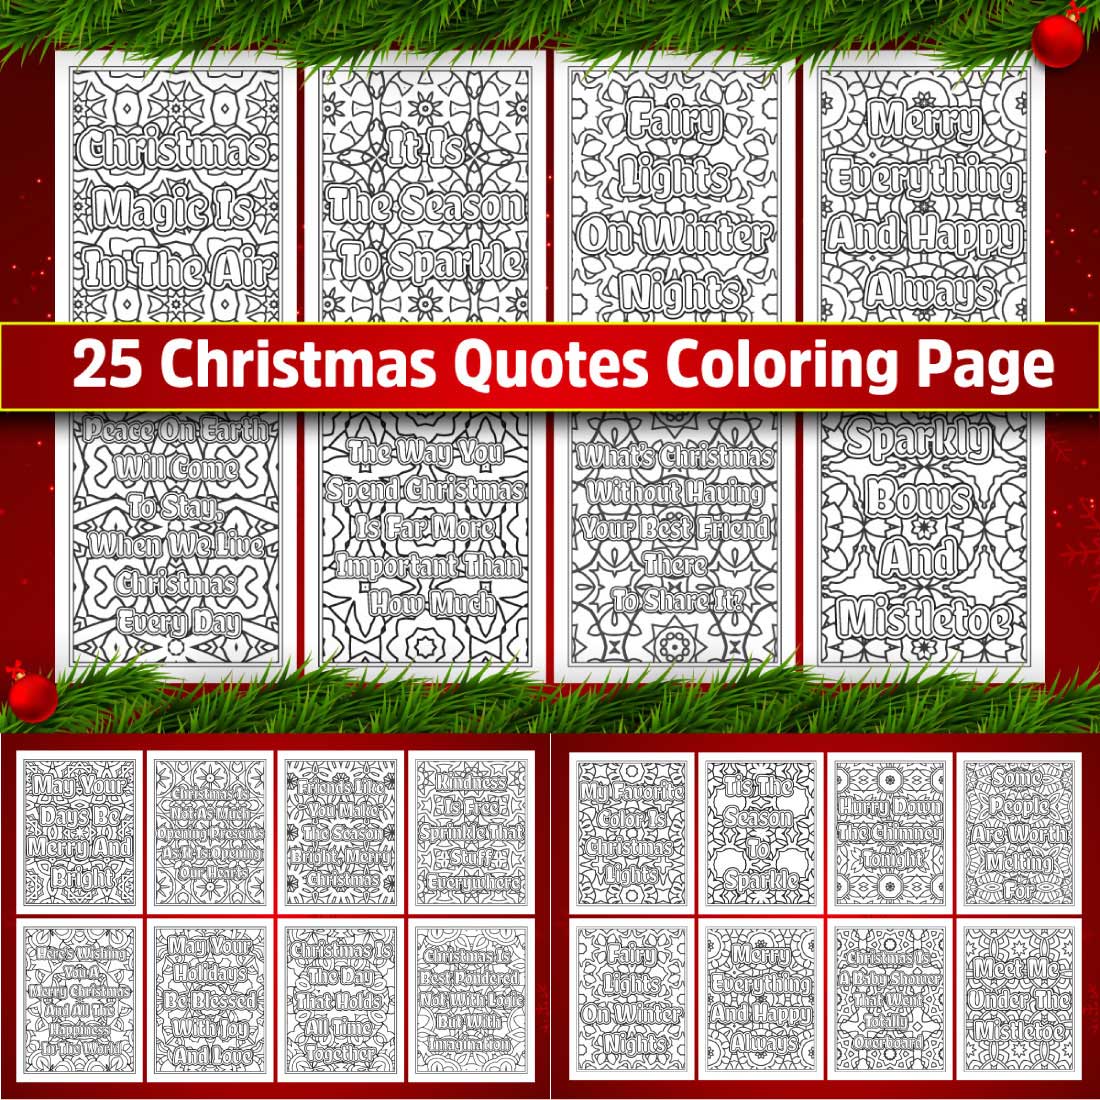 Christmas Quotes Coloring Page cover image.